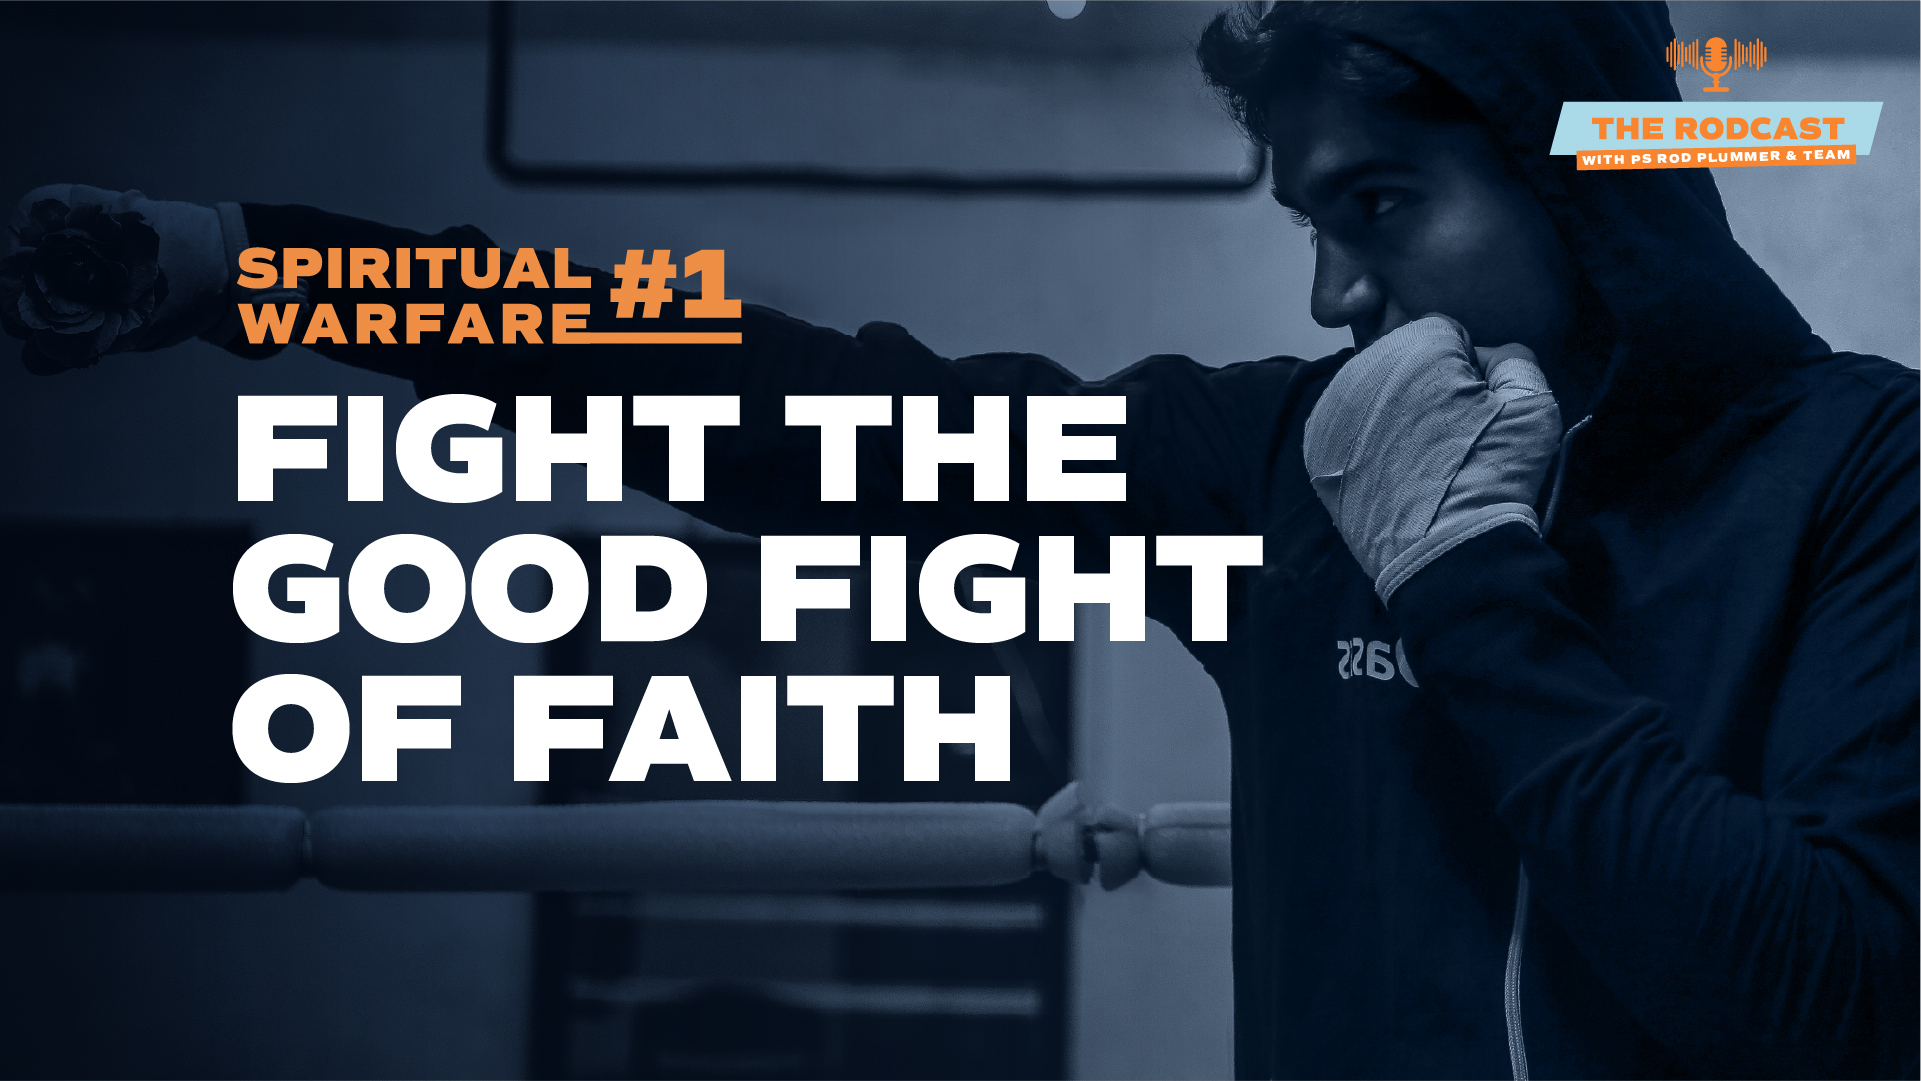 Featured image for “Spiritual Warfare: #1 Fight the good fight of faith”